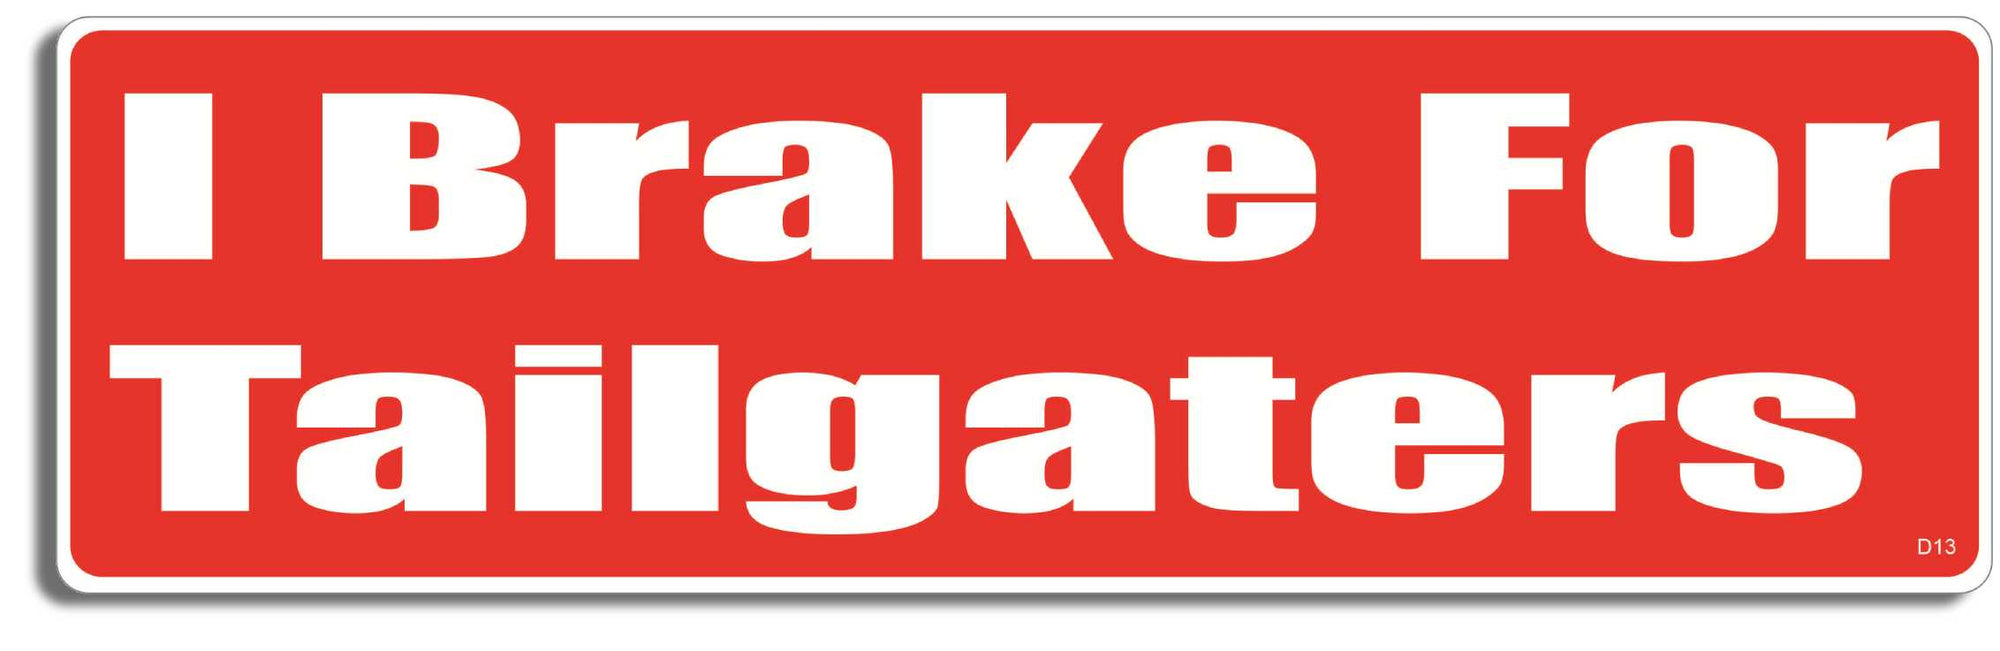 I brake for tailgaters - 3" x 10" Bumper Sticker--Car Magnet- -  Decal Bumper Sticker-funny Bumper Sticker Car Magnet I brake for tailgaters-  Decal for carsdrive safely, Driving, Funny, safe driving, tailgaters, tailgating